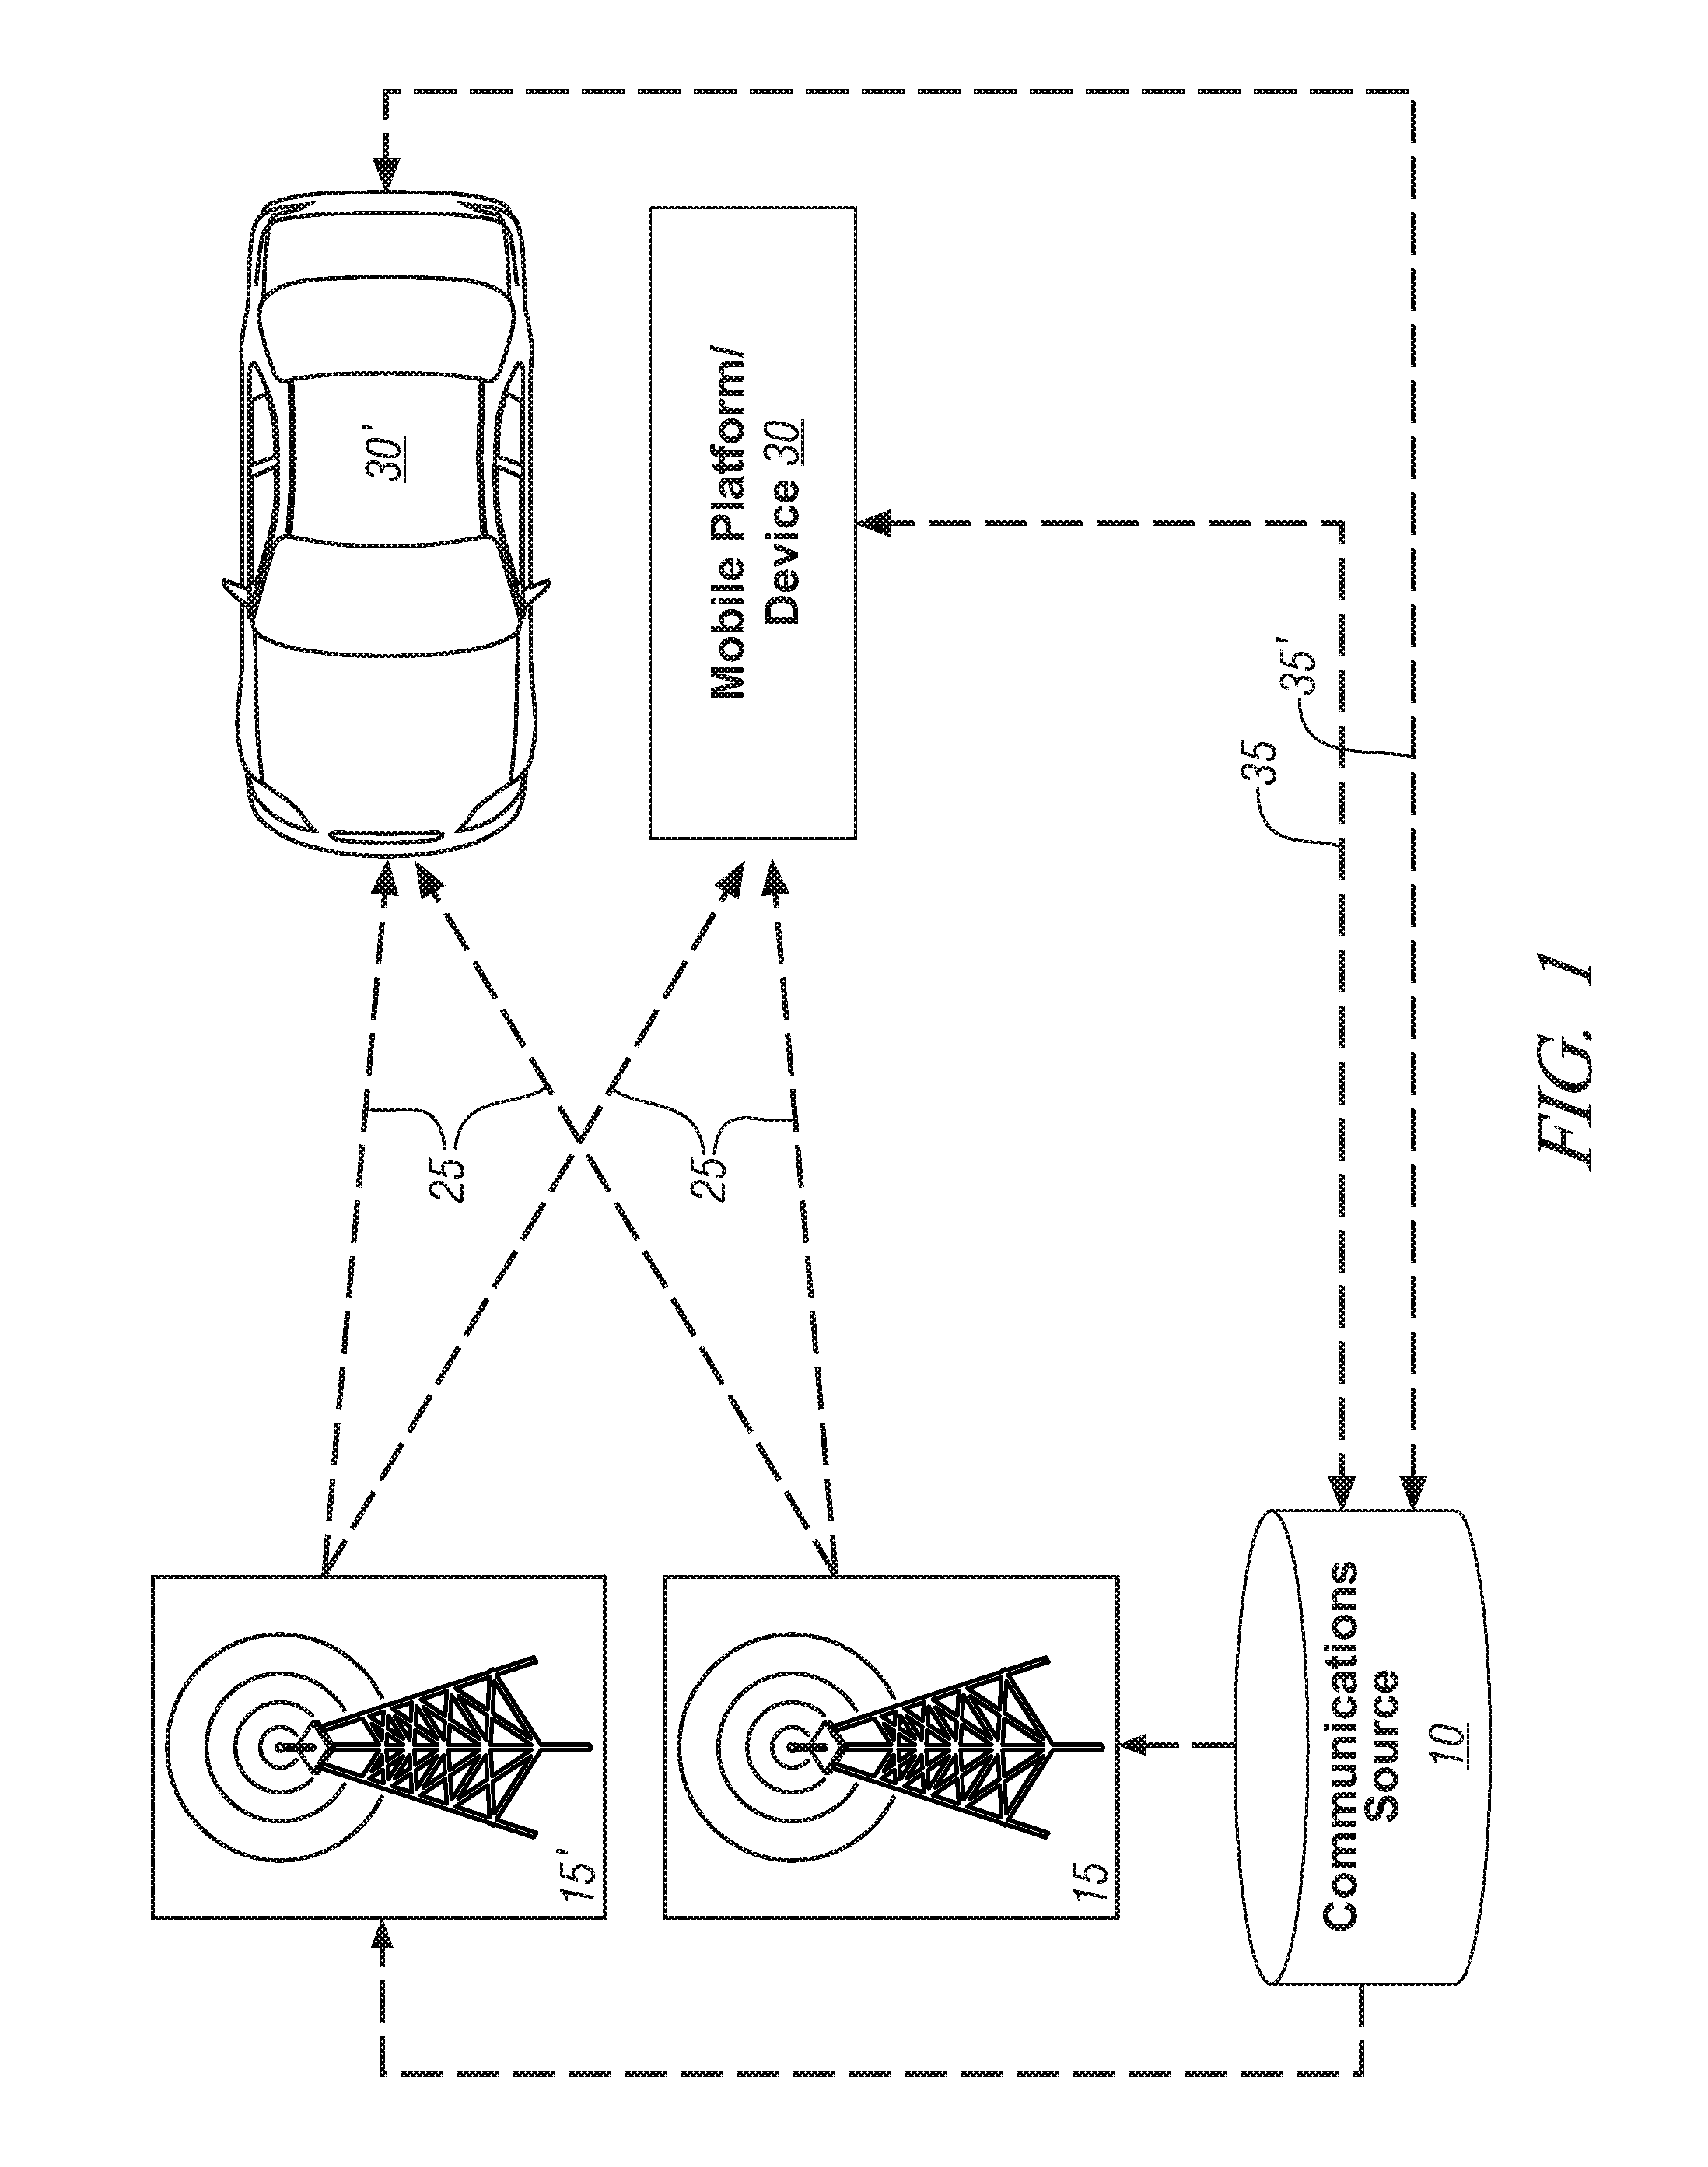 Method and apparatus for communicating a graphic image to a mobile platform via broadcast services